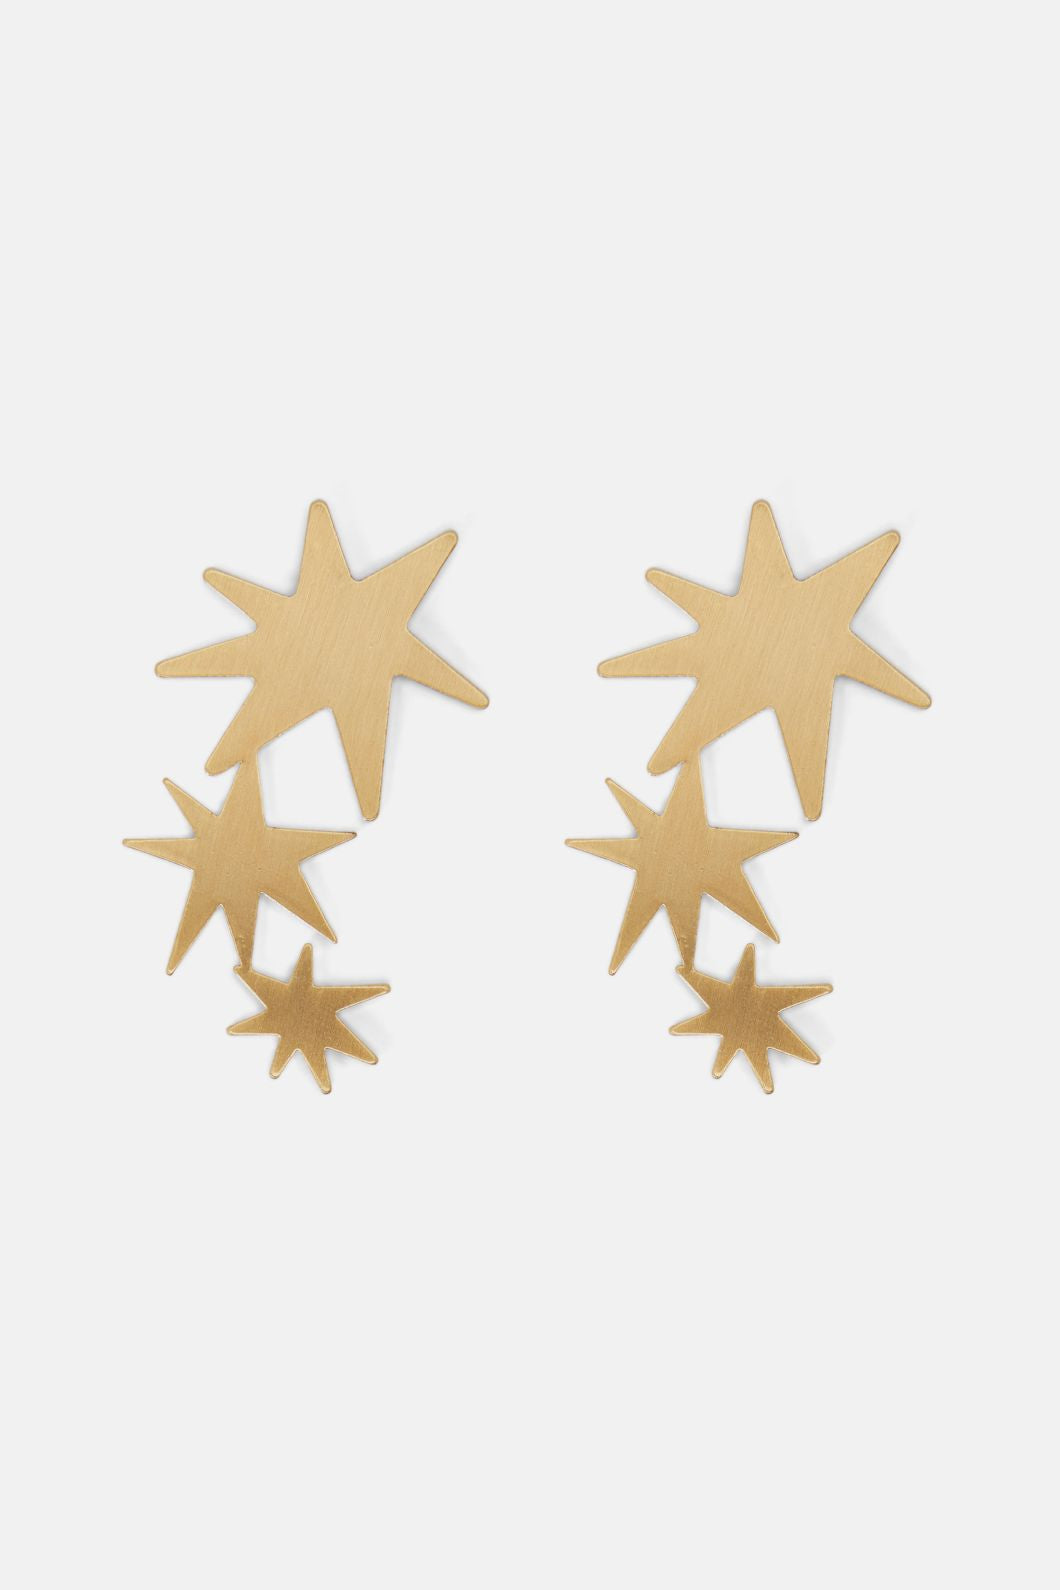 14k gold north star diamond drop earrings by Dower & Hall | Finematter